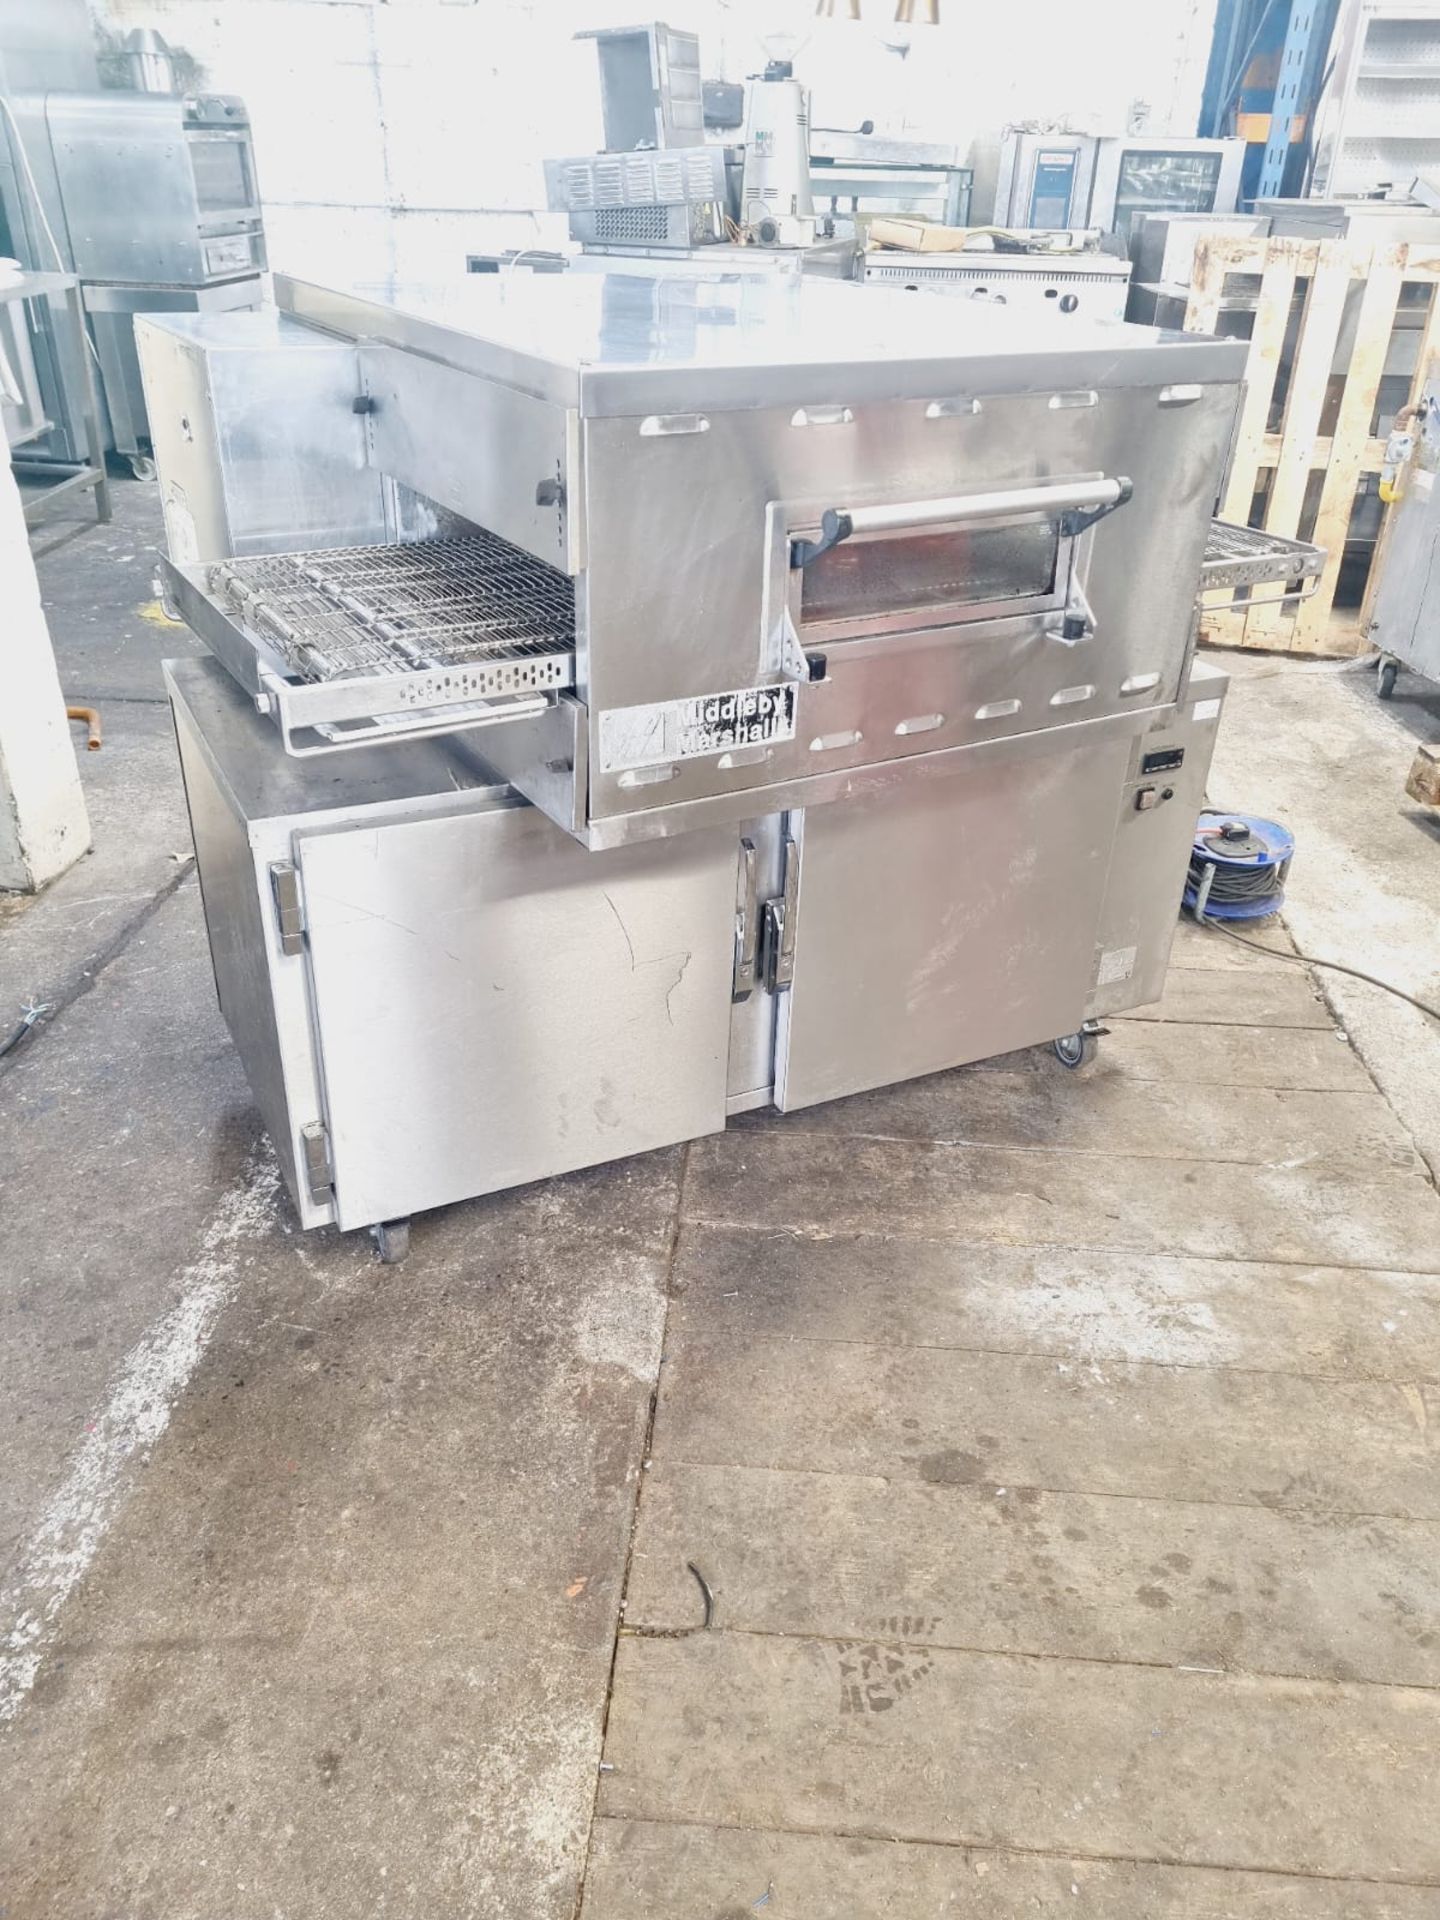 MIDDLE BY MARSHALL GAS PIZZA OVEN - YEAR 2015 - FULLY WORKING AND SERVICED - NO STAND - 20 INCH BELT